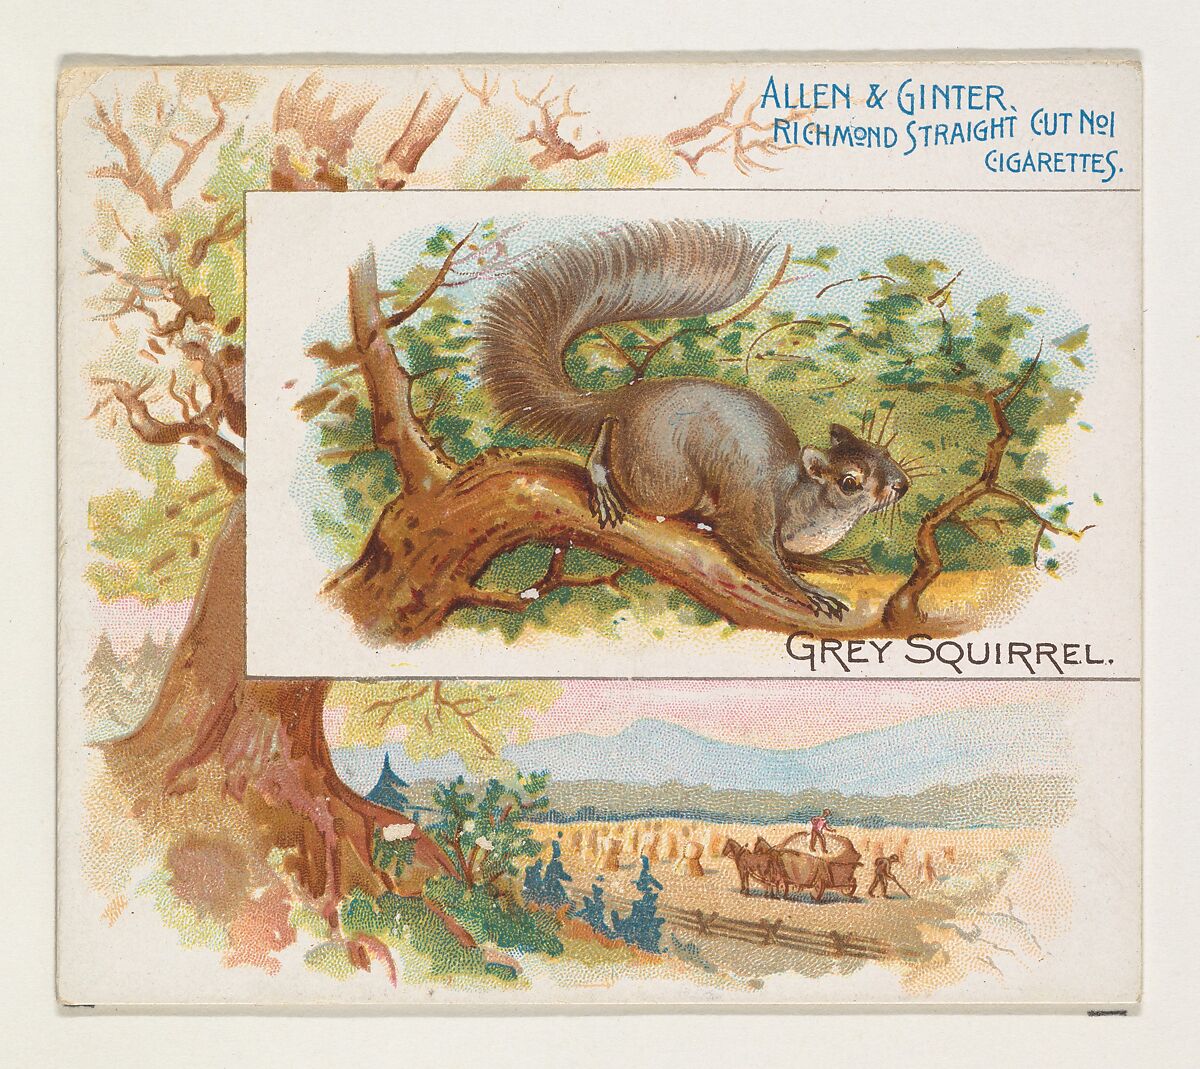 Grey Squirrel, from Quadrupeds series (N41) for Allen & Ginter Cigarettes, Issued by Allen &amp; Ginter (American, Richmond, Virginia), Commercial color lithograph 